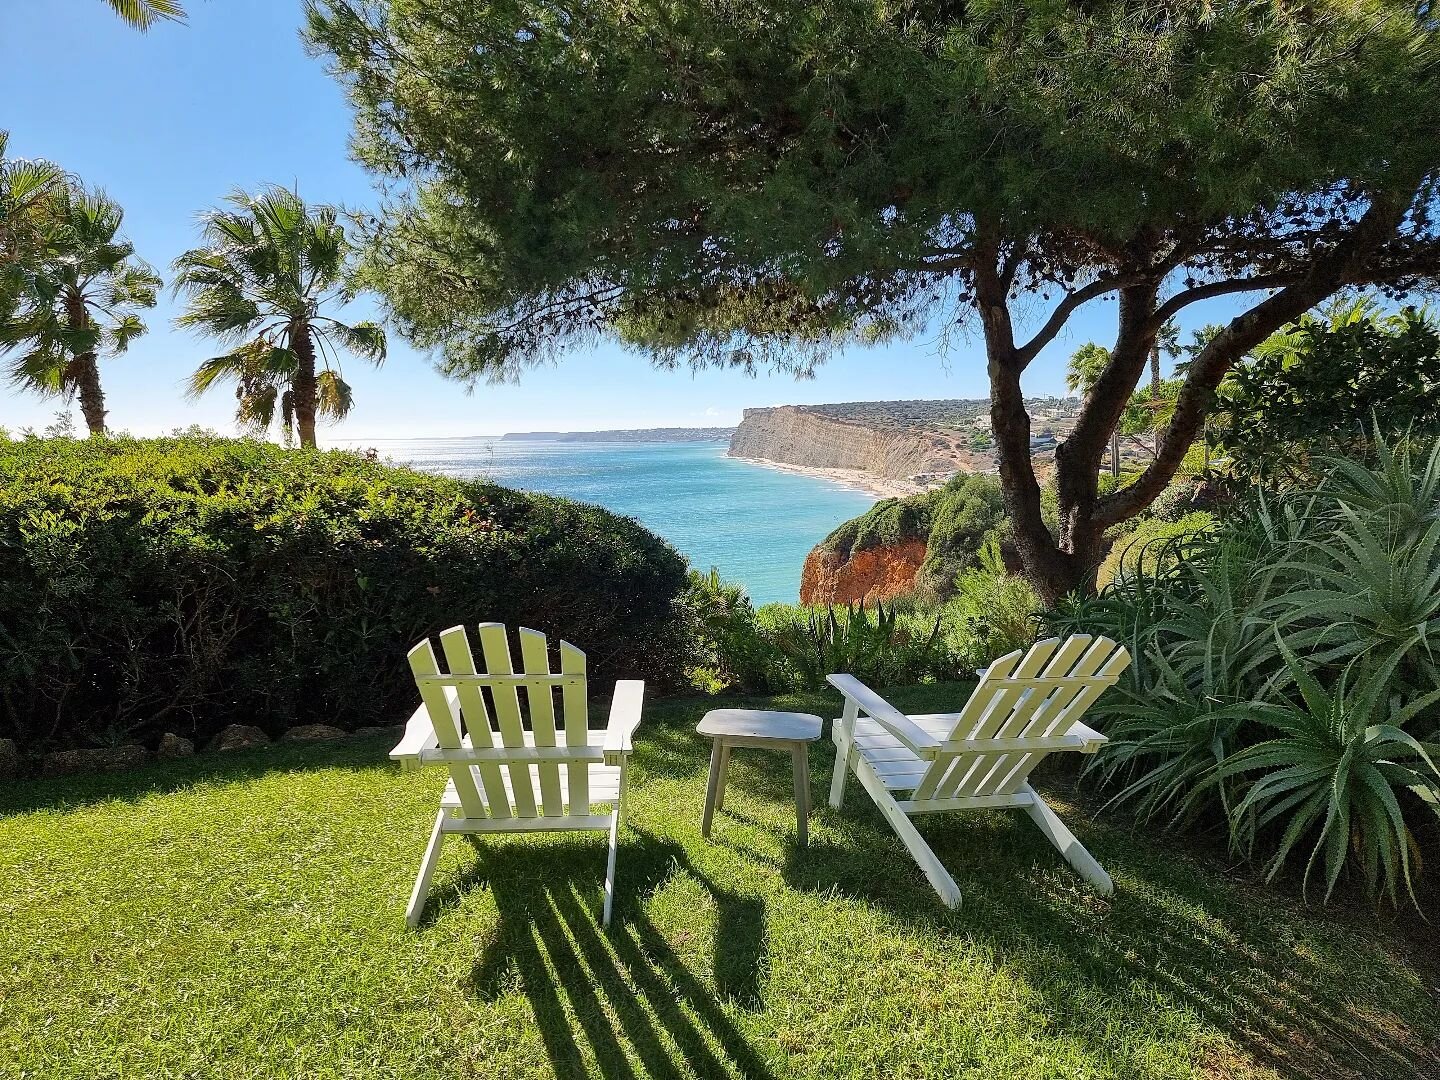 Who else would like to have a seat with a view like this? 😍

Visiting the wonderful garden of #boutiquehotel #vivendamiranda in #lagos 

--------
#visitalgarve #visitportugal #Algarve #portugal #portugallovers #portugaltravel #carvoeiroclubegroup #s